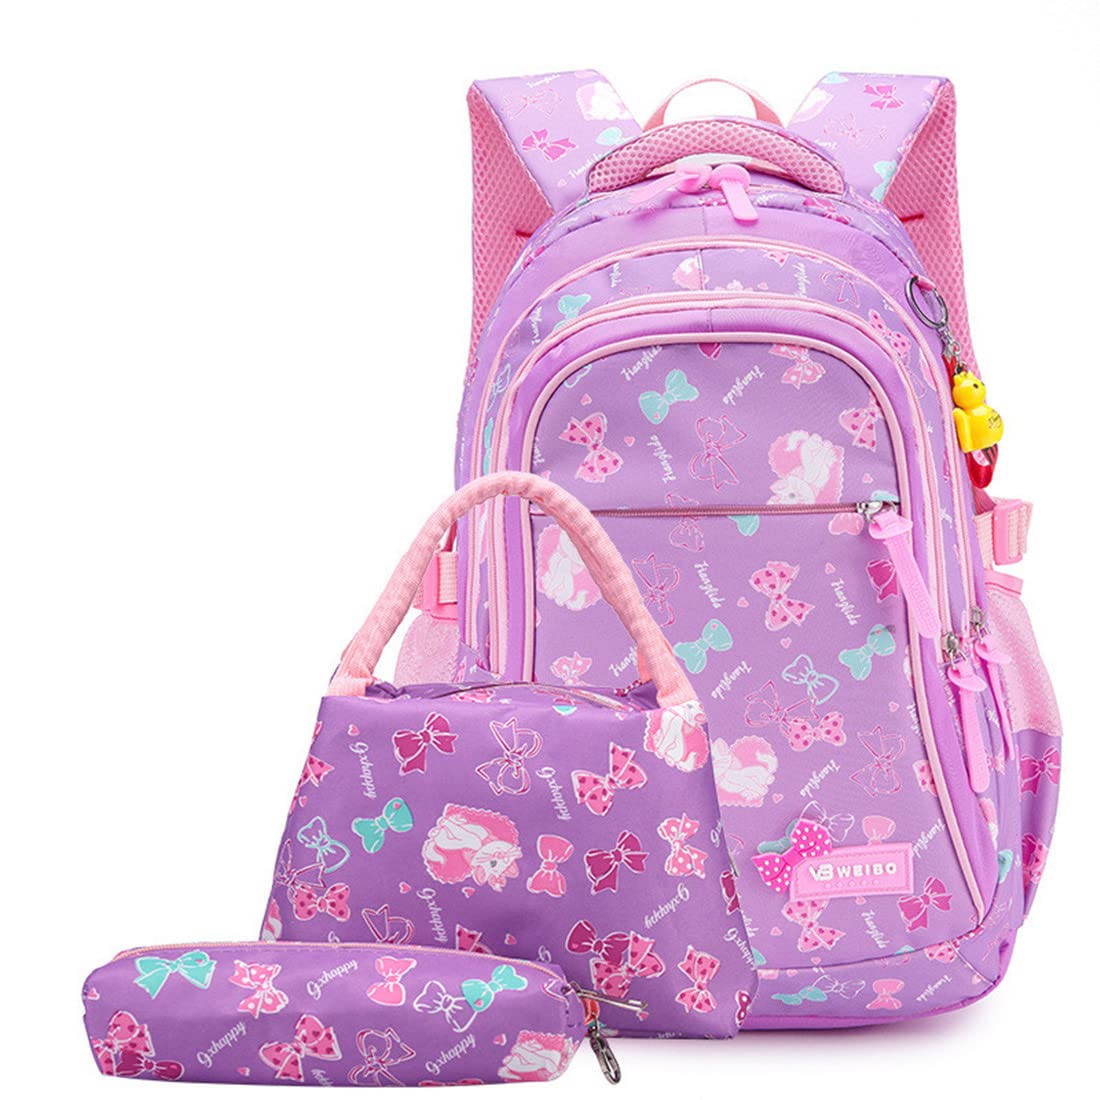 YJMKOI 3PCS Cat print Backpack for Girls 3 in 1 Cute bow print Primary Schoolbag Sets Middle Girl Bookbag with Lunch Box